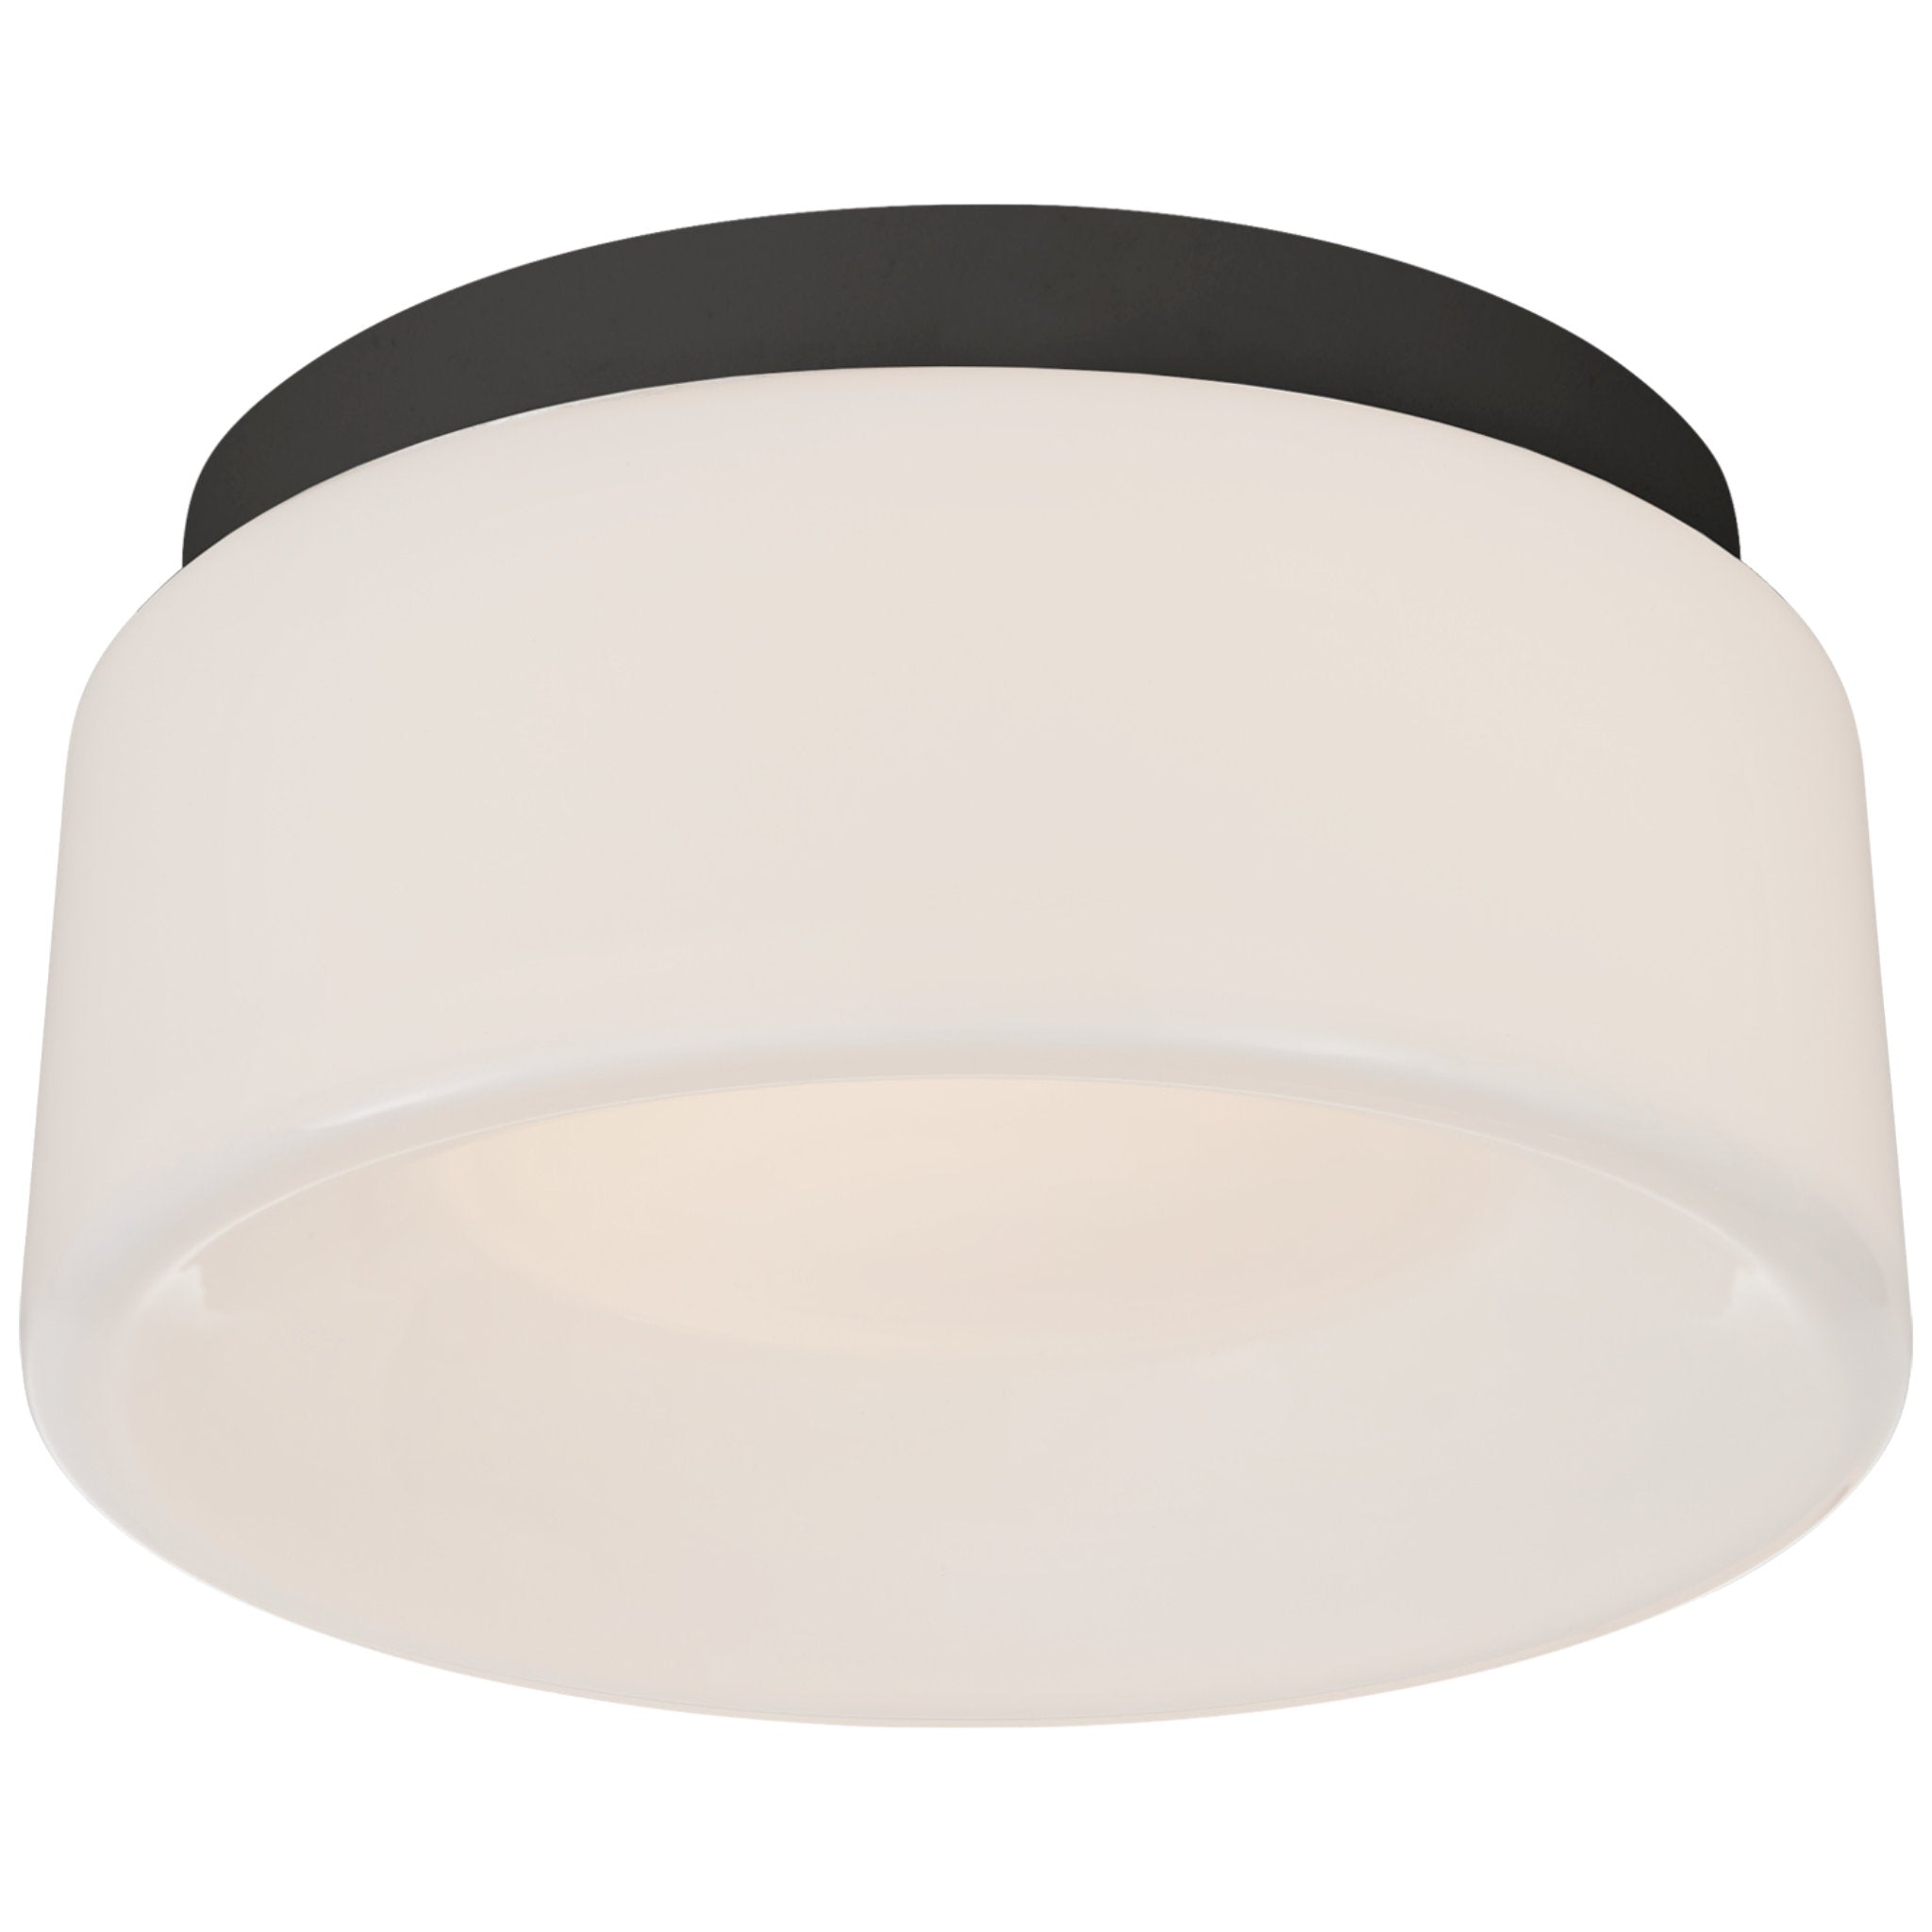 Barbara Barry Halo 5.5" Solitaire Flush Mount in Matte Black with White Glass